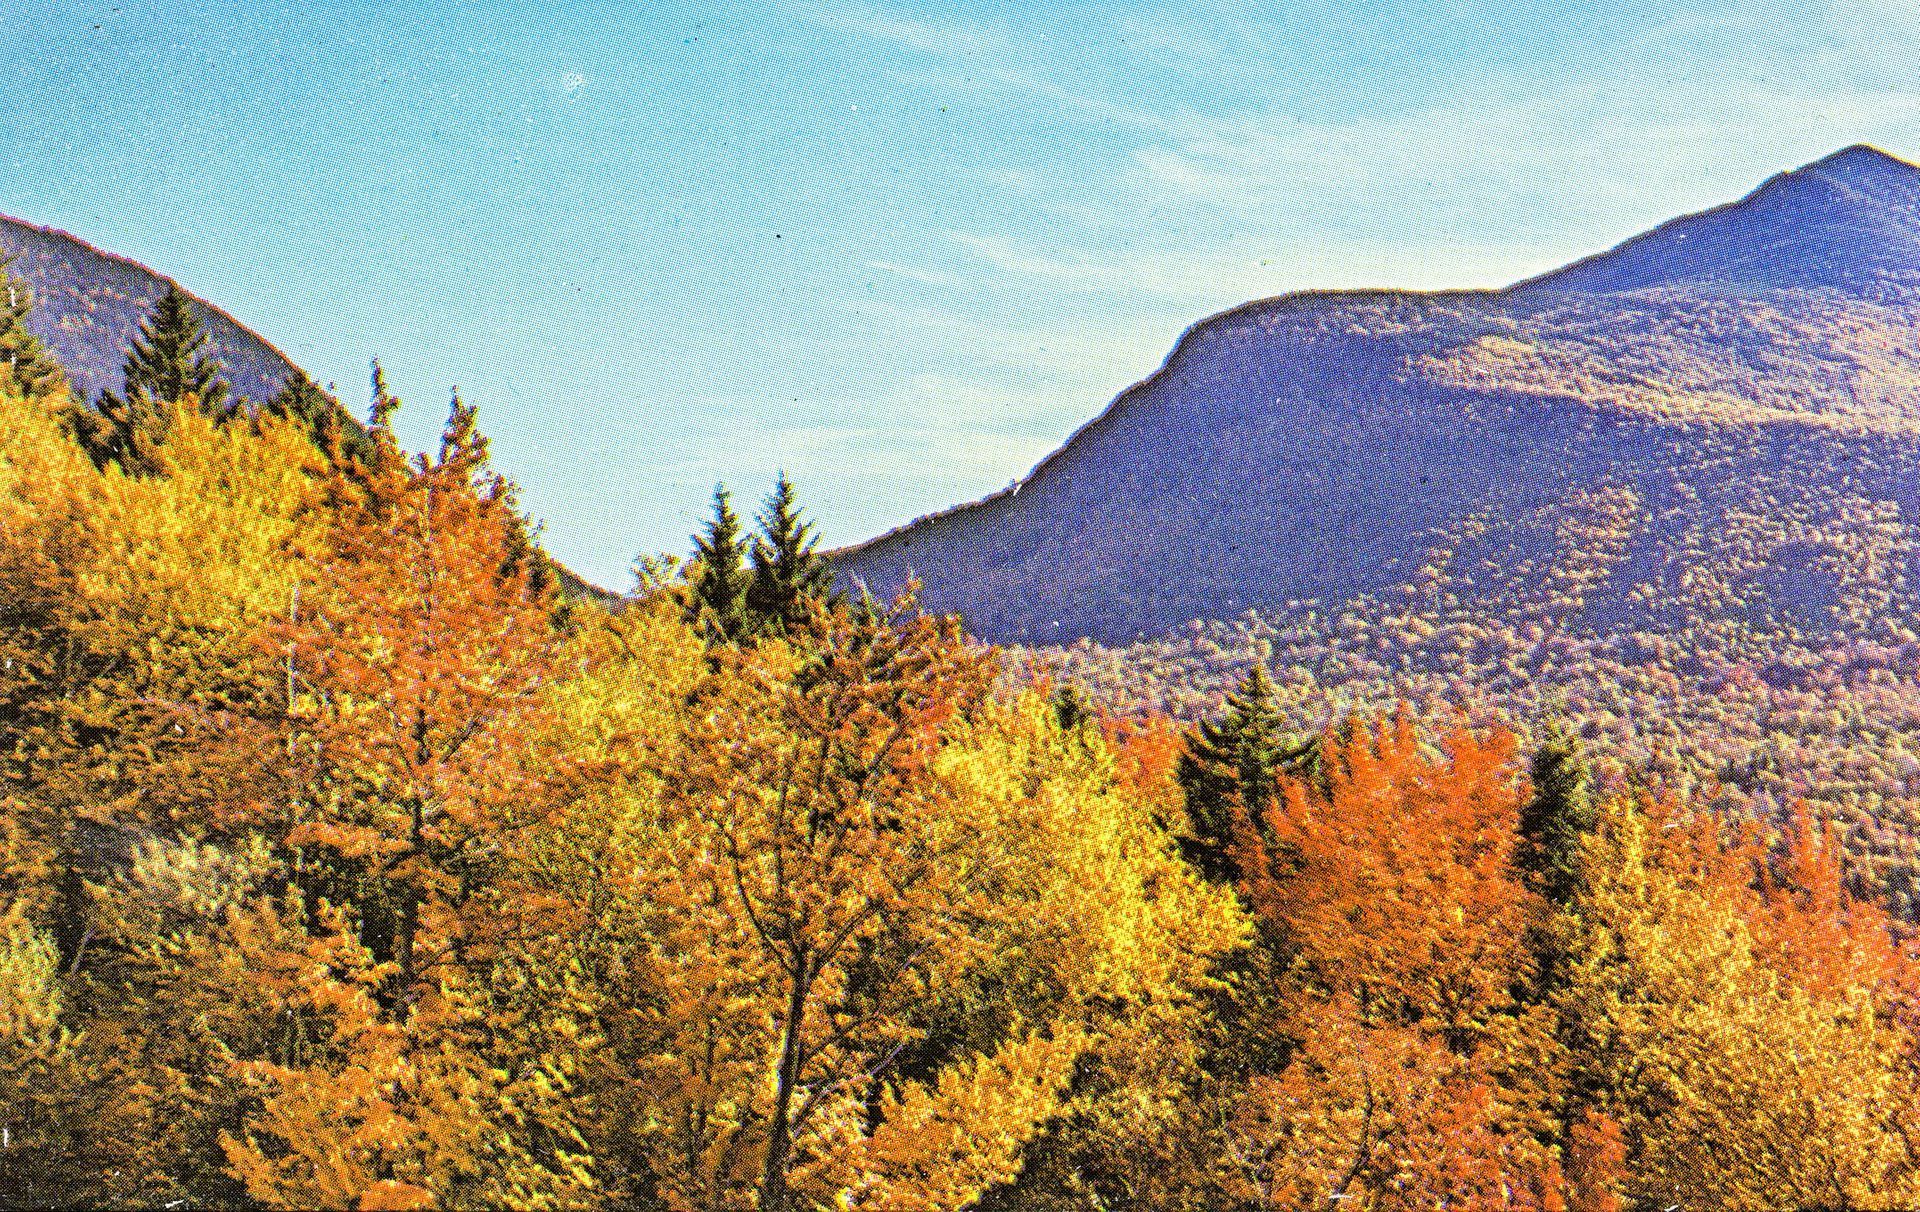 Kancamagus Highway, White Mountain National Forest, New Hampshire